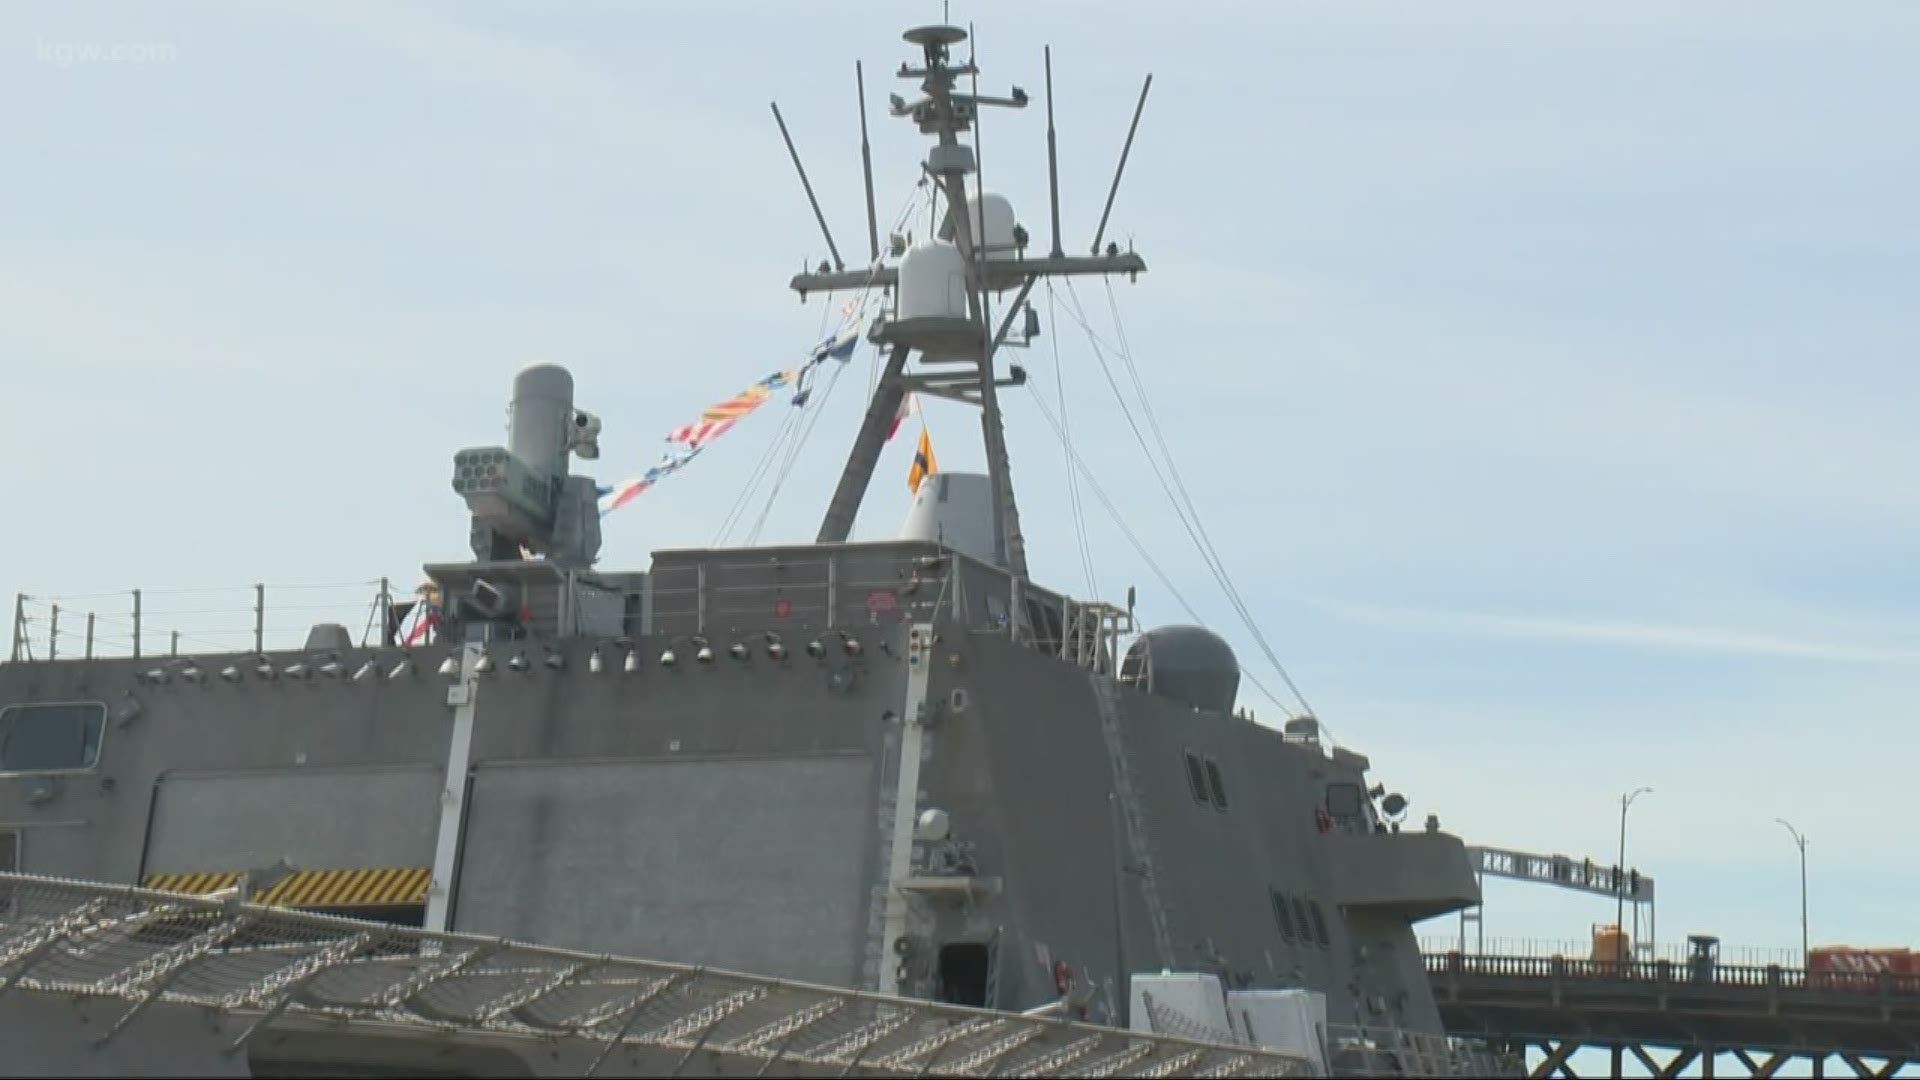 With the end of the Rose Festival, Portland bid farewell on Sunday to Fleet Week.